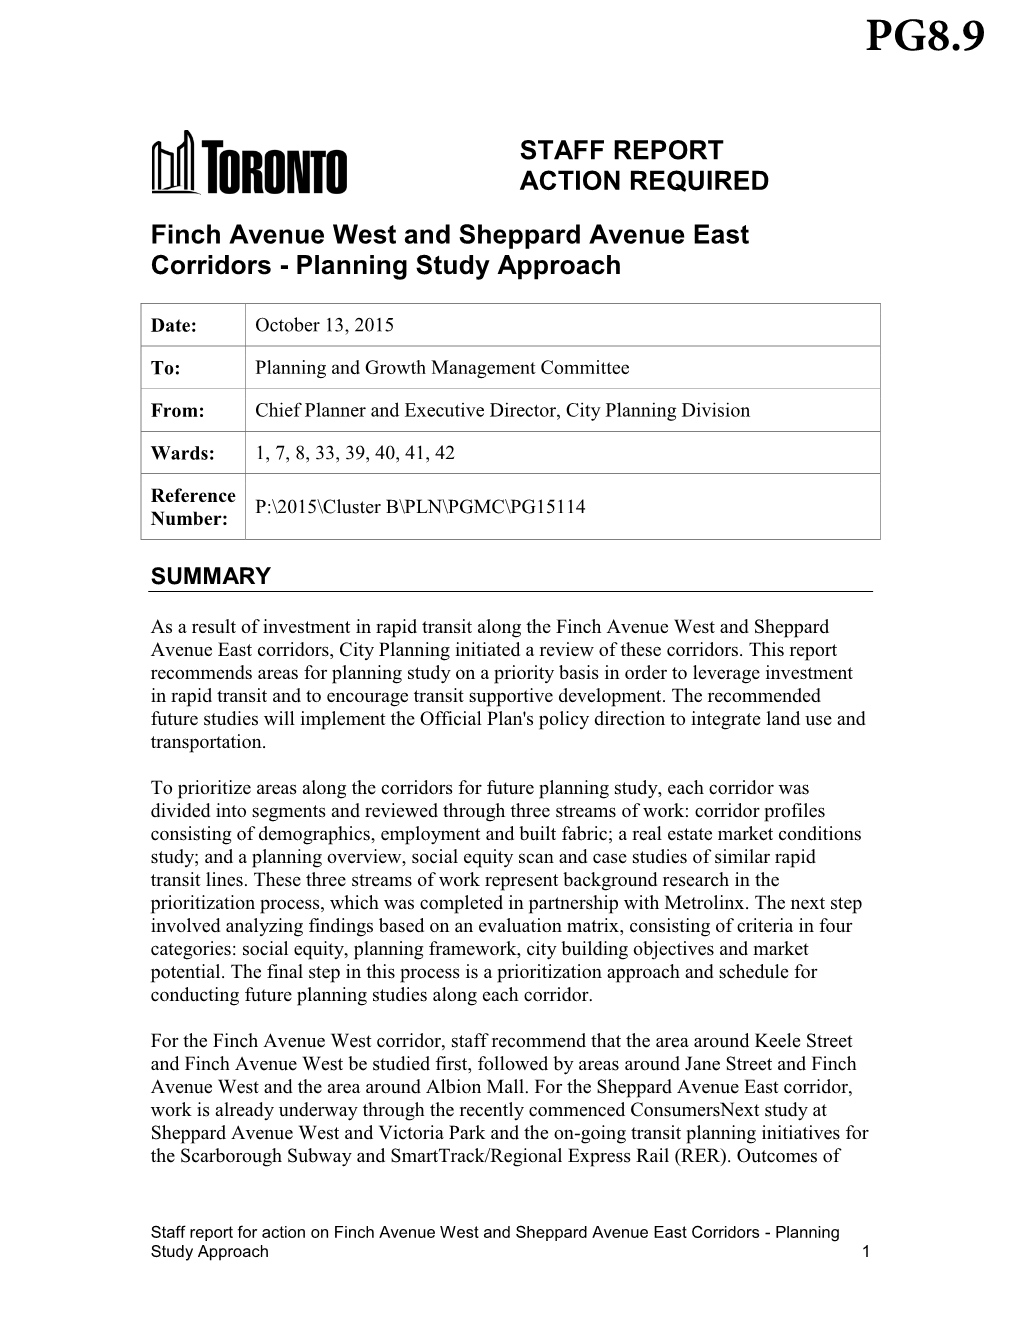 Finch Avenue West and Sheppard Avenue East Corridors - Planning Study Approach